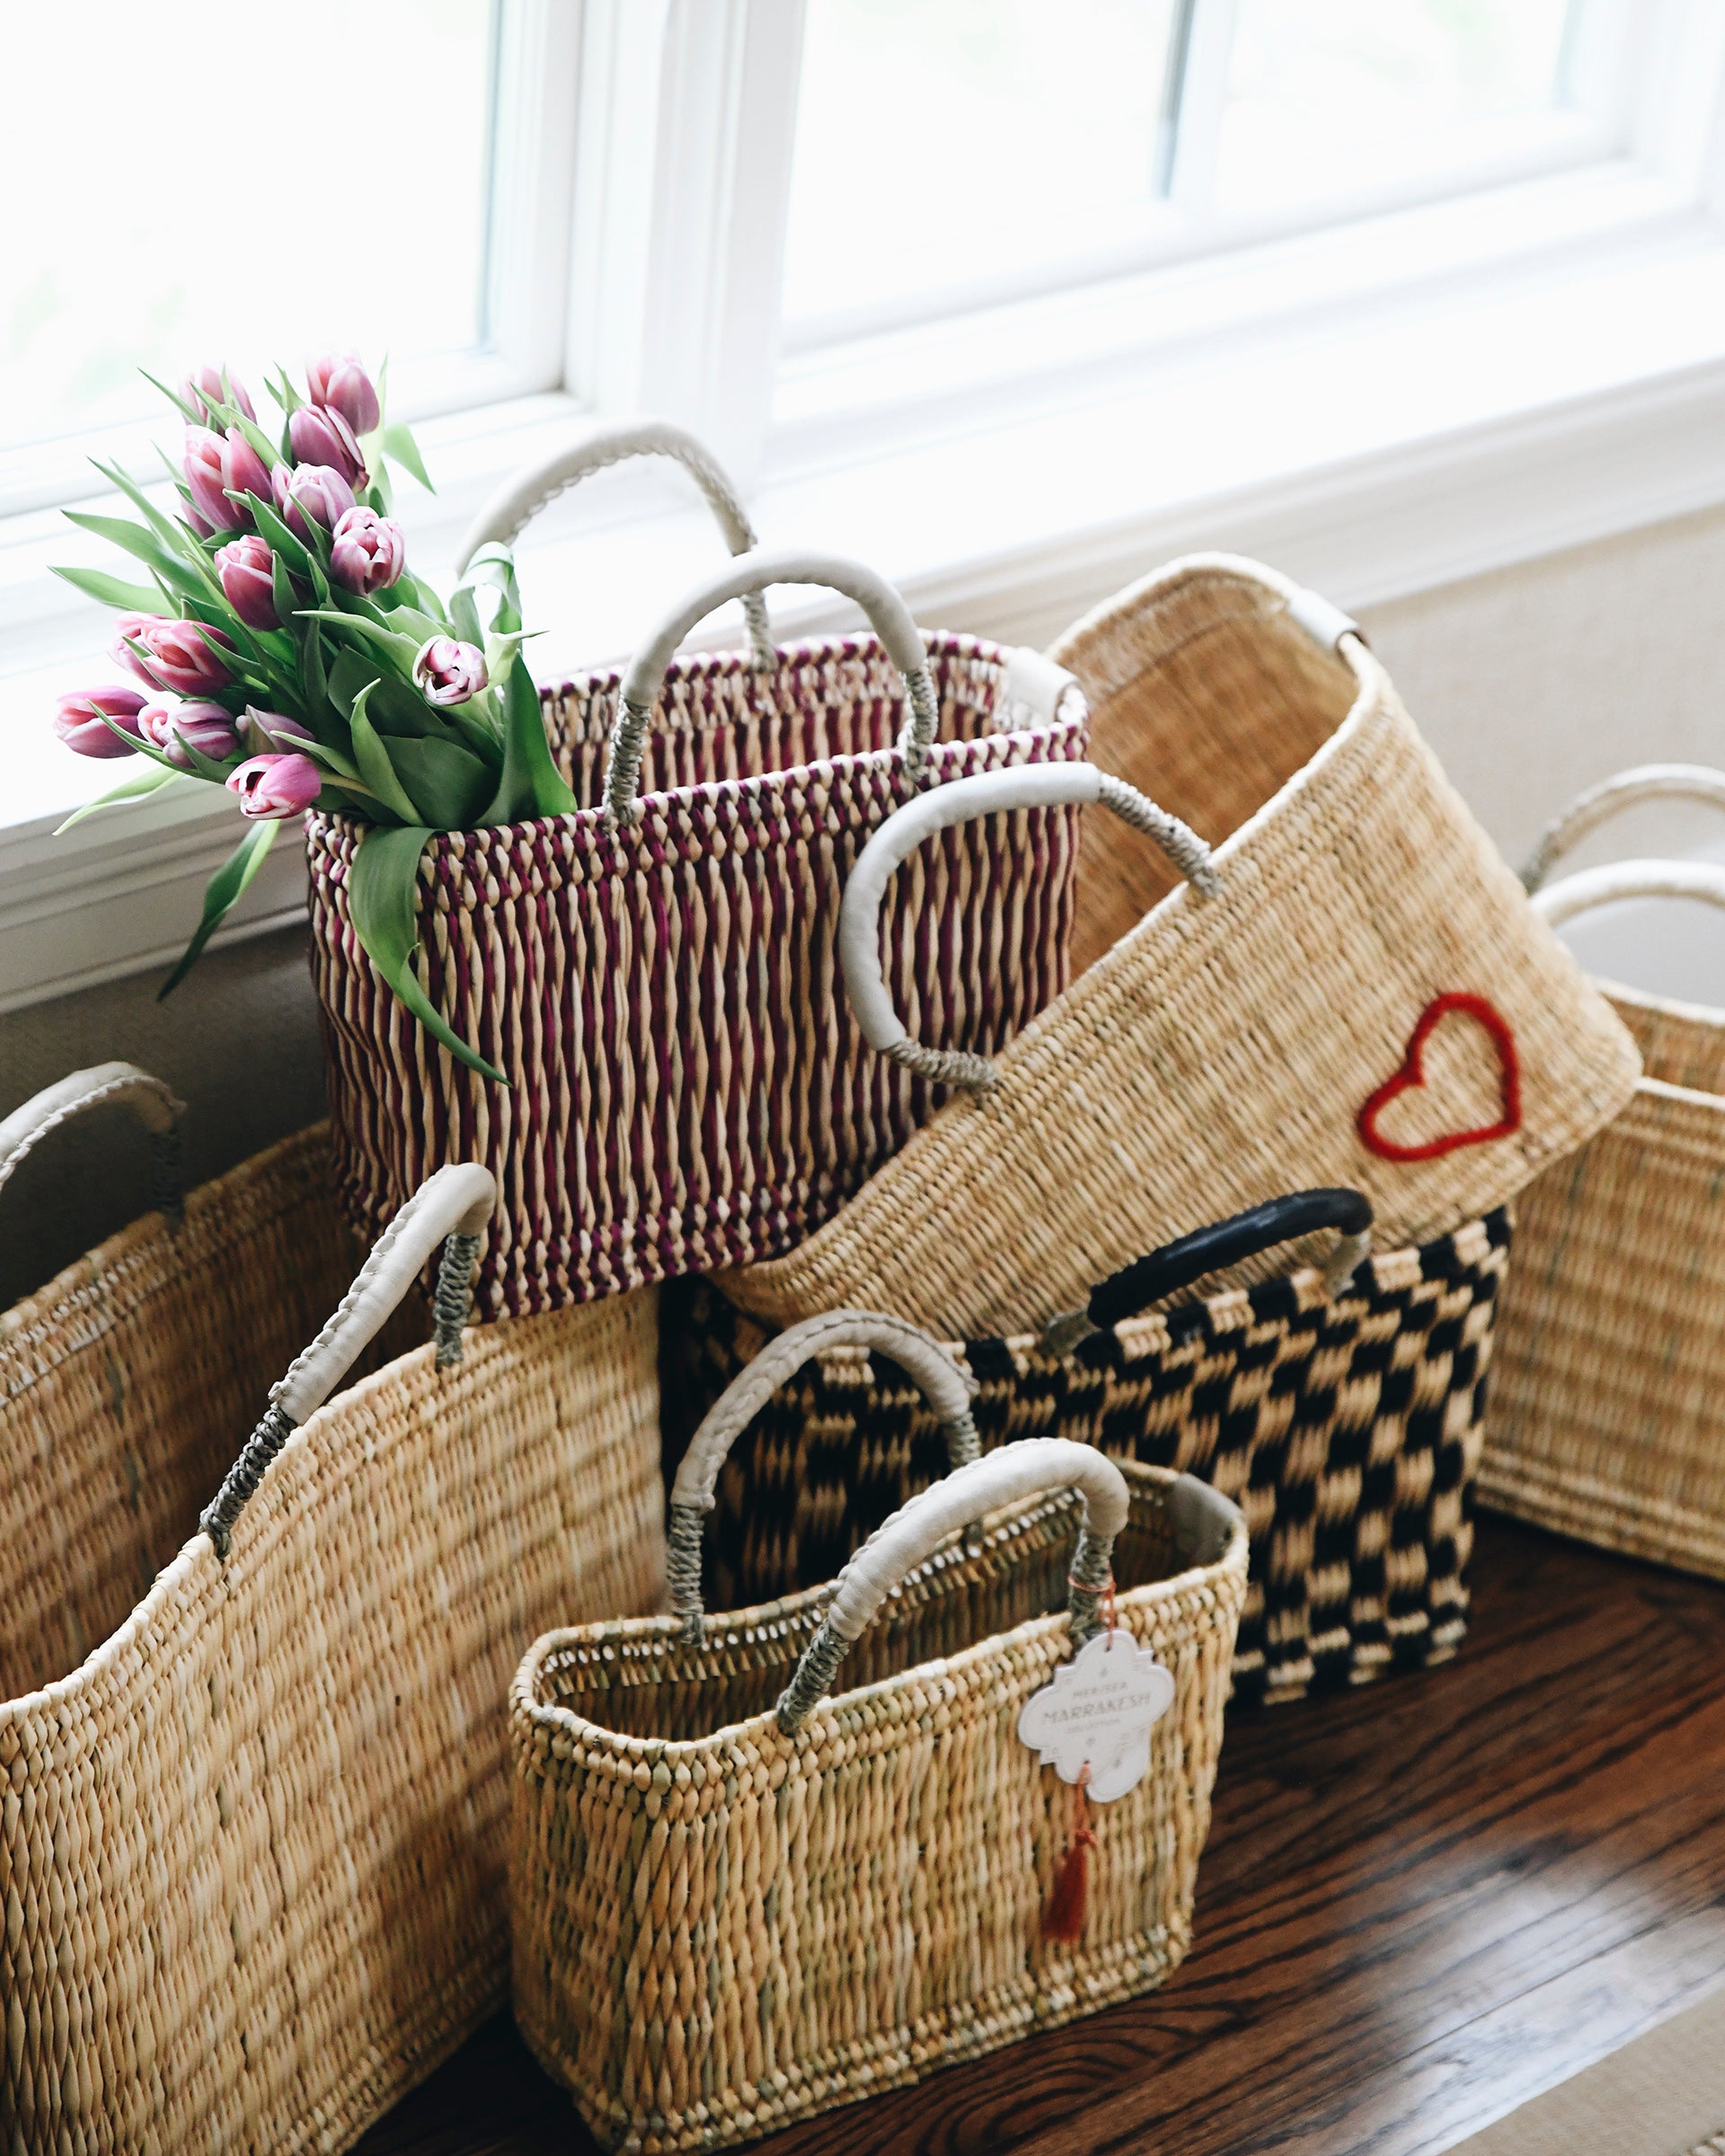 six different colored and sized straw baskets stacked near a window on a hardwood floor